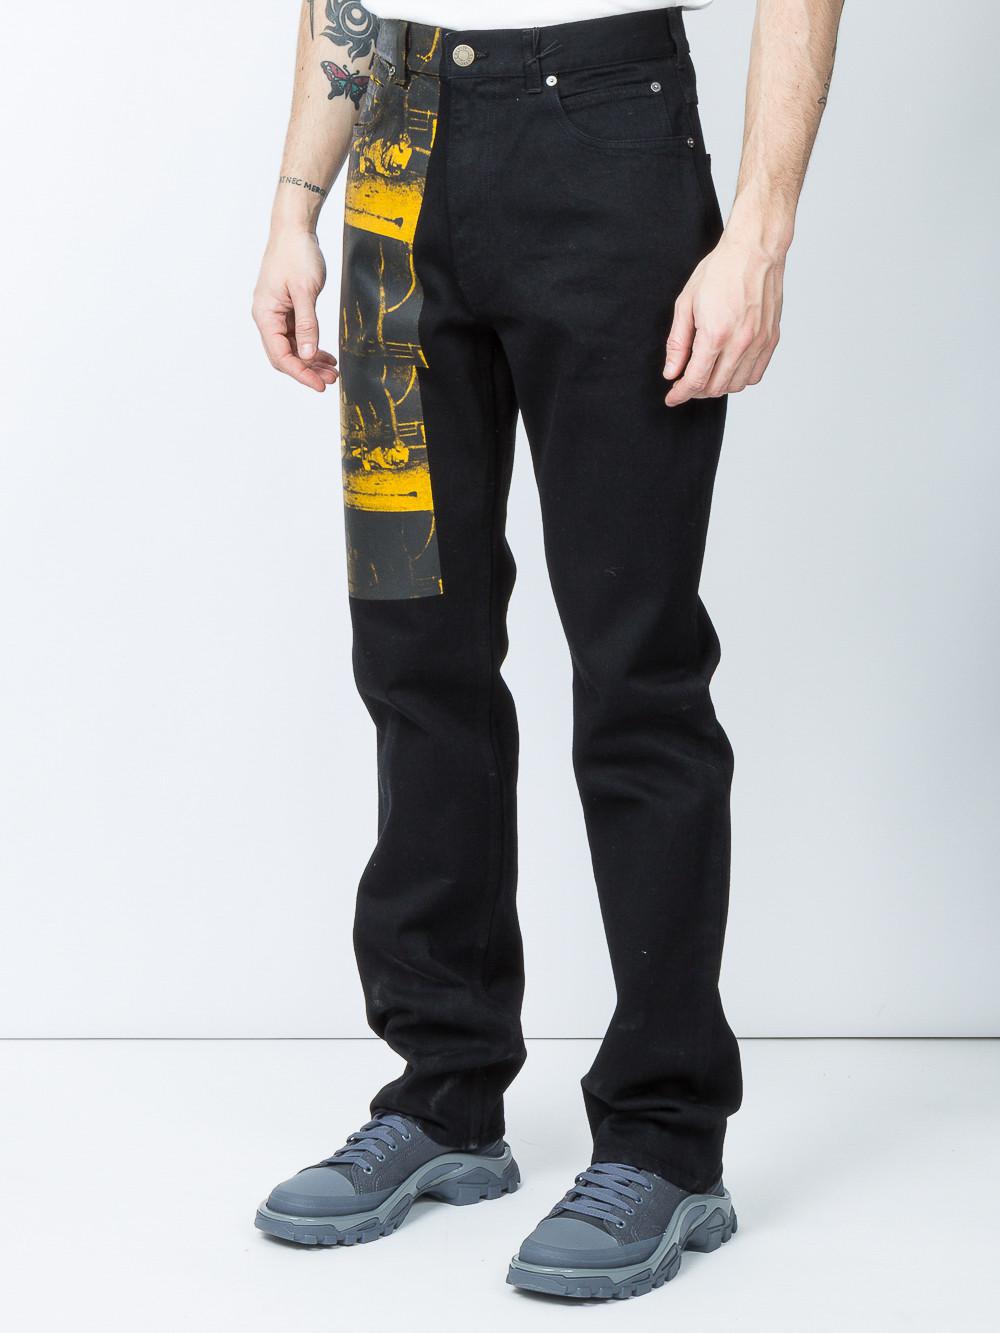 Calvin Klein X Andy Warhol Jeans Factory Sale, SAVE 60%.